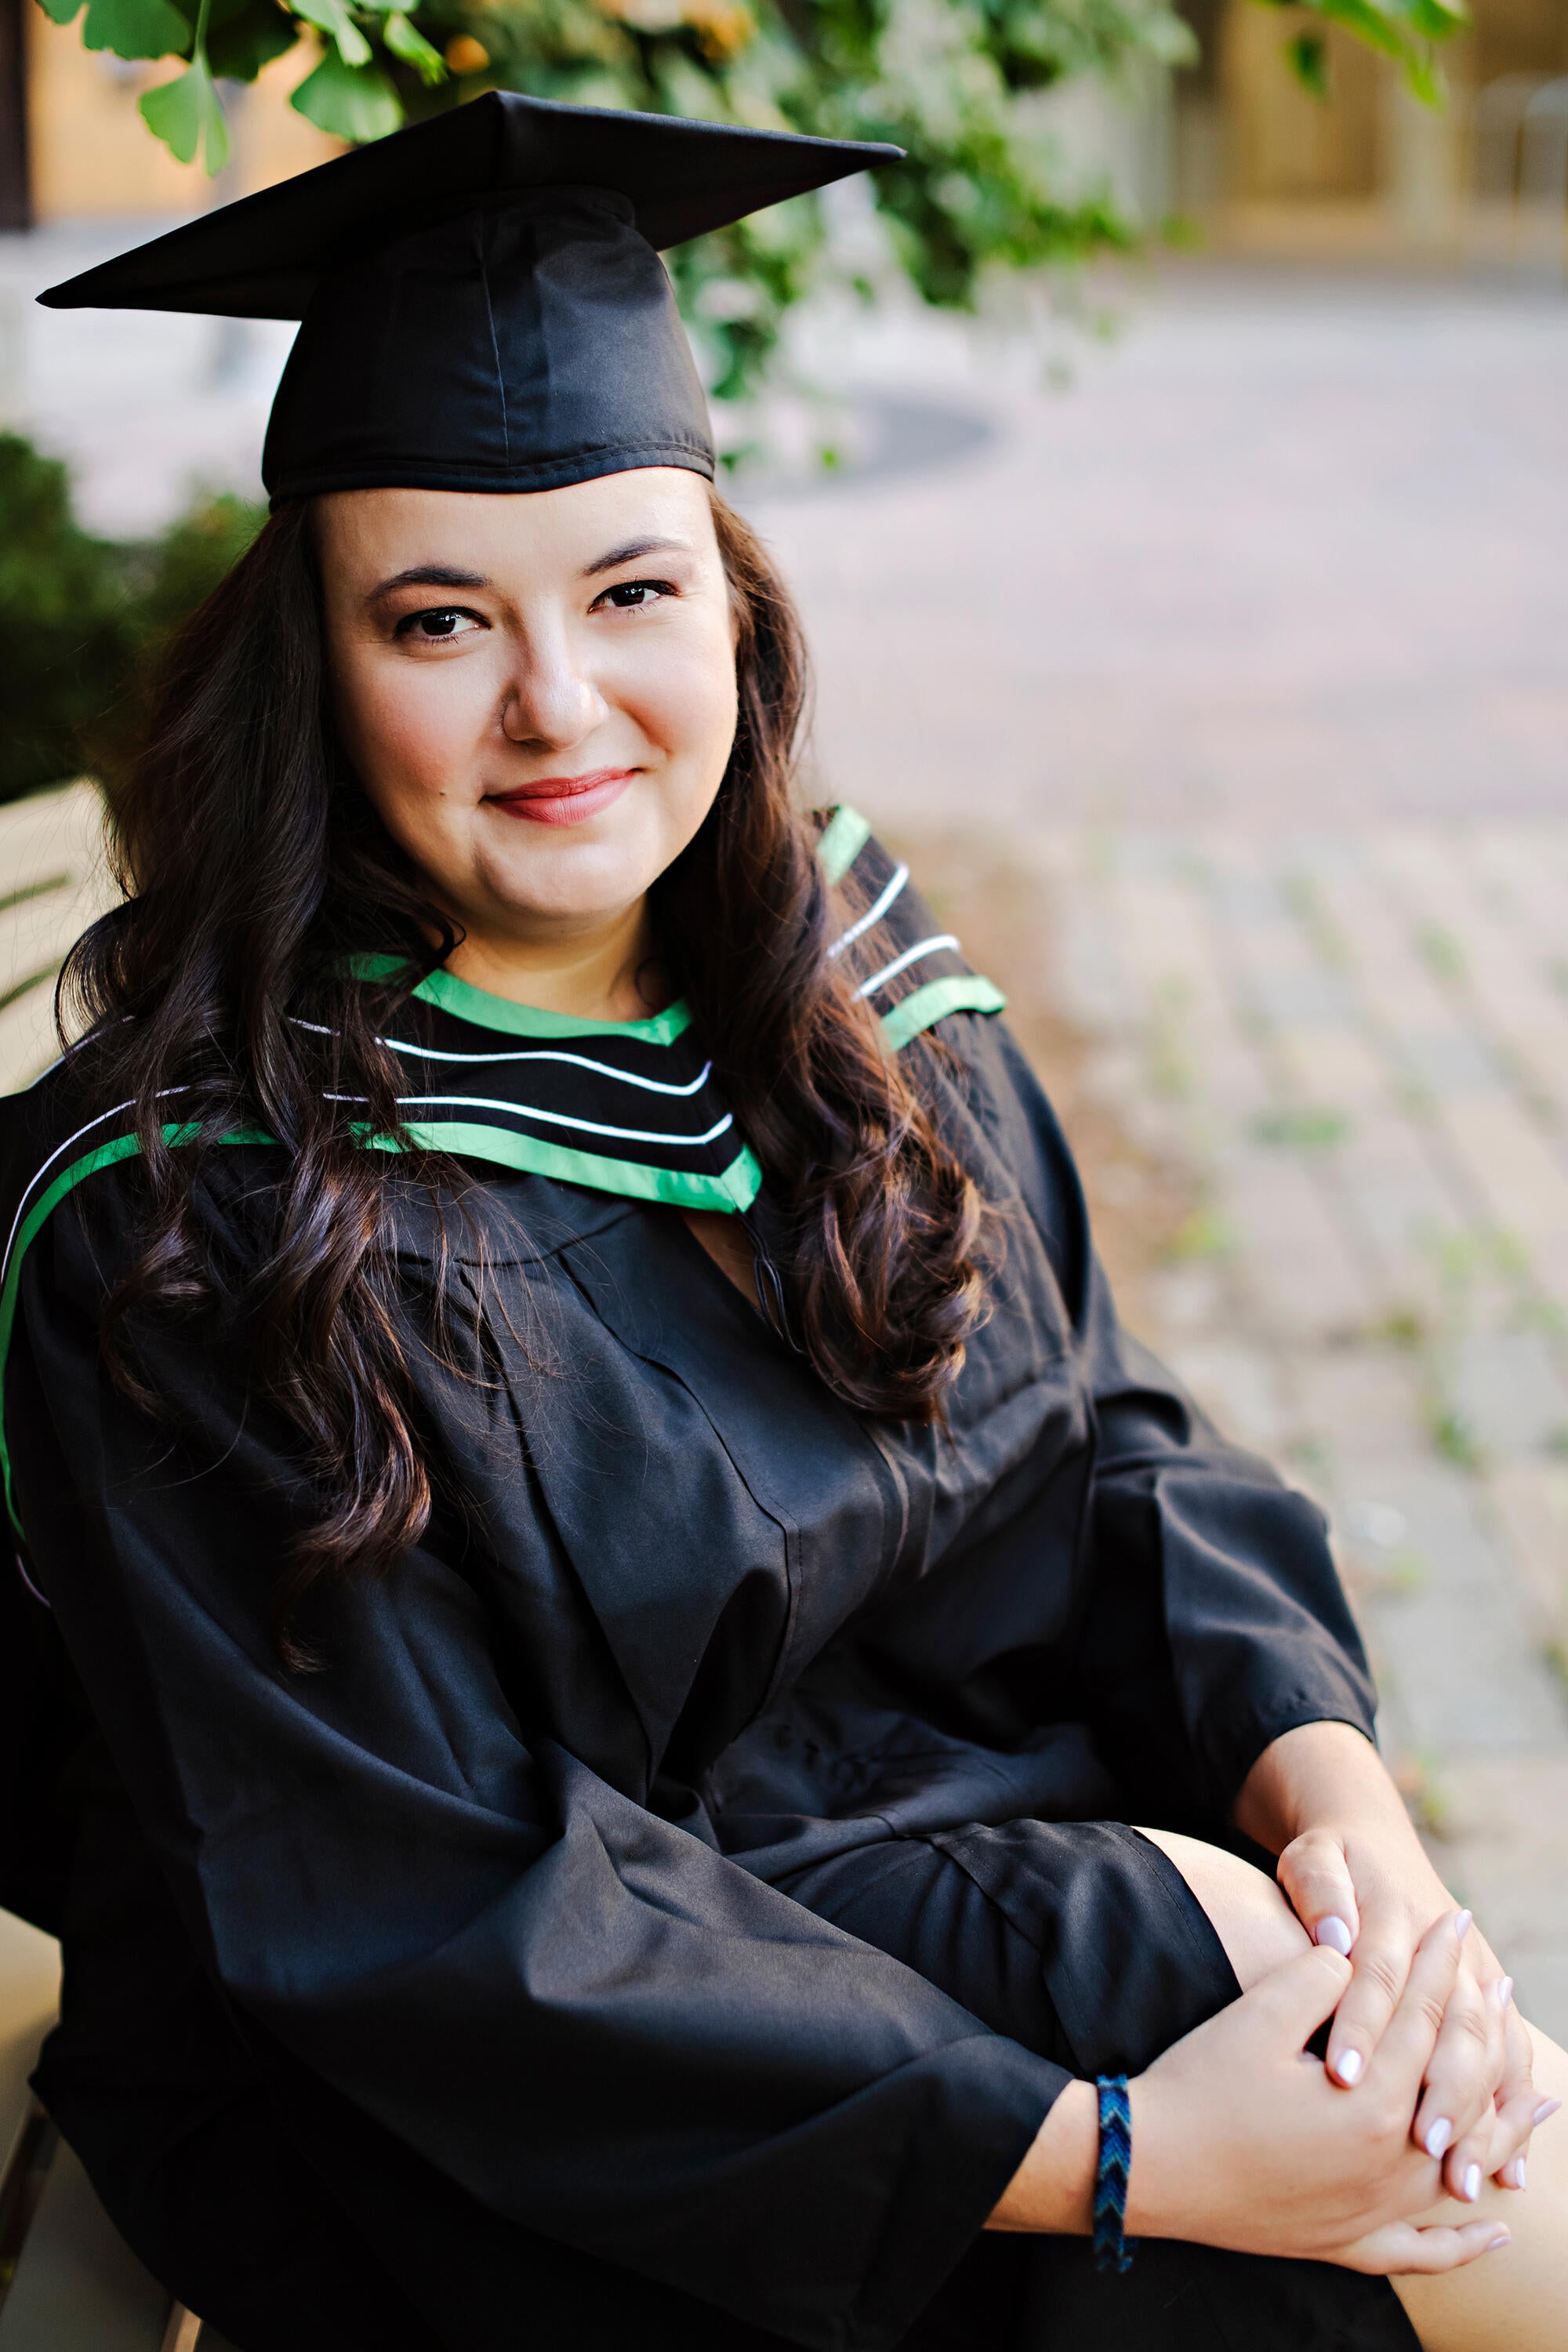 student wearing cap and gown poses while seated on a bench